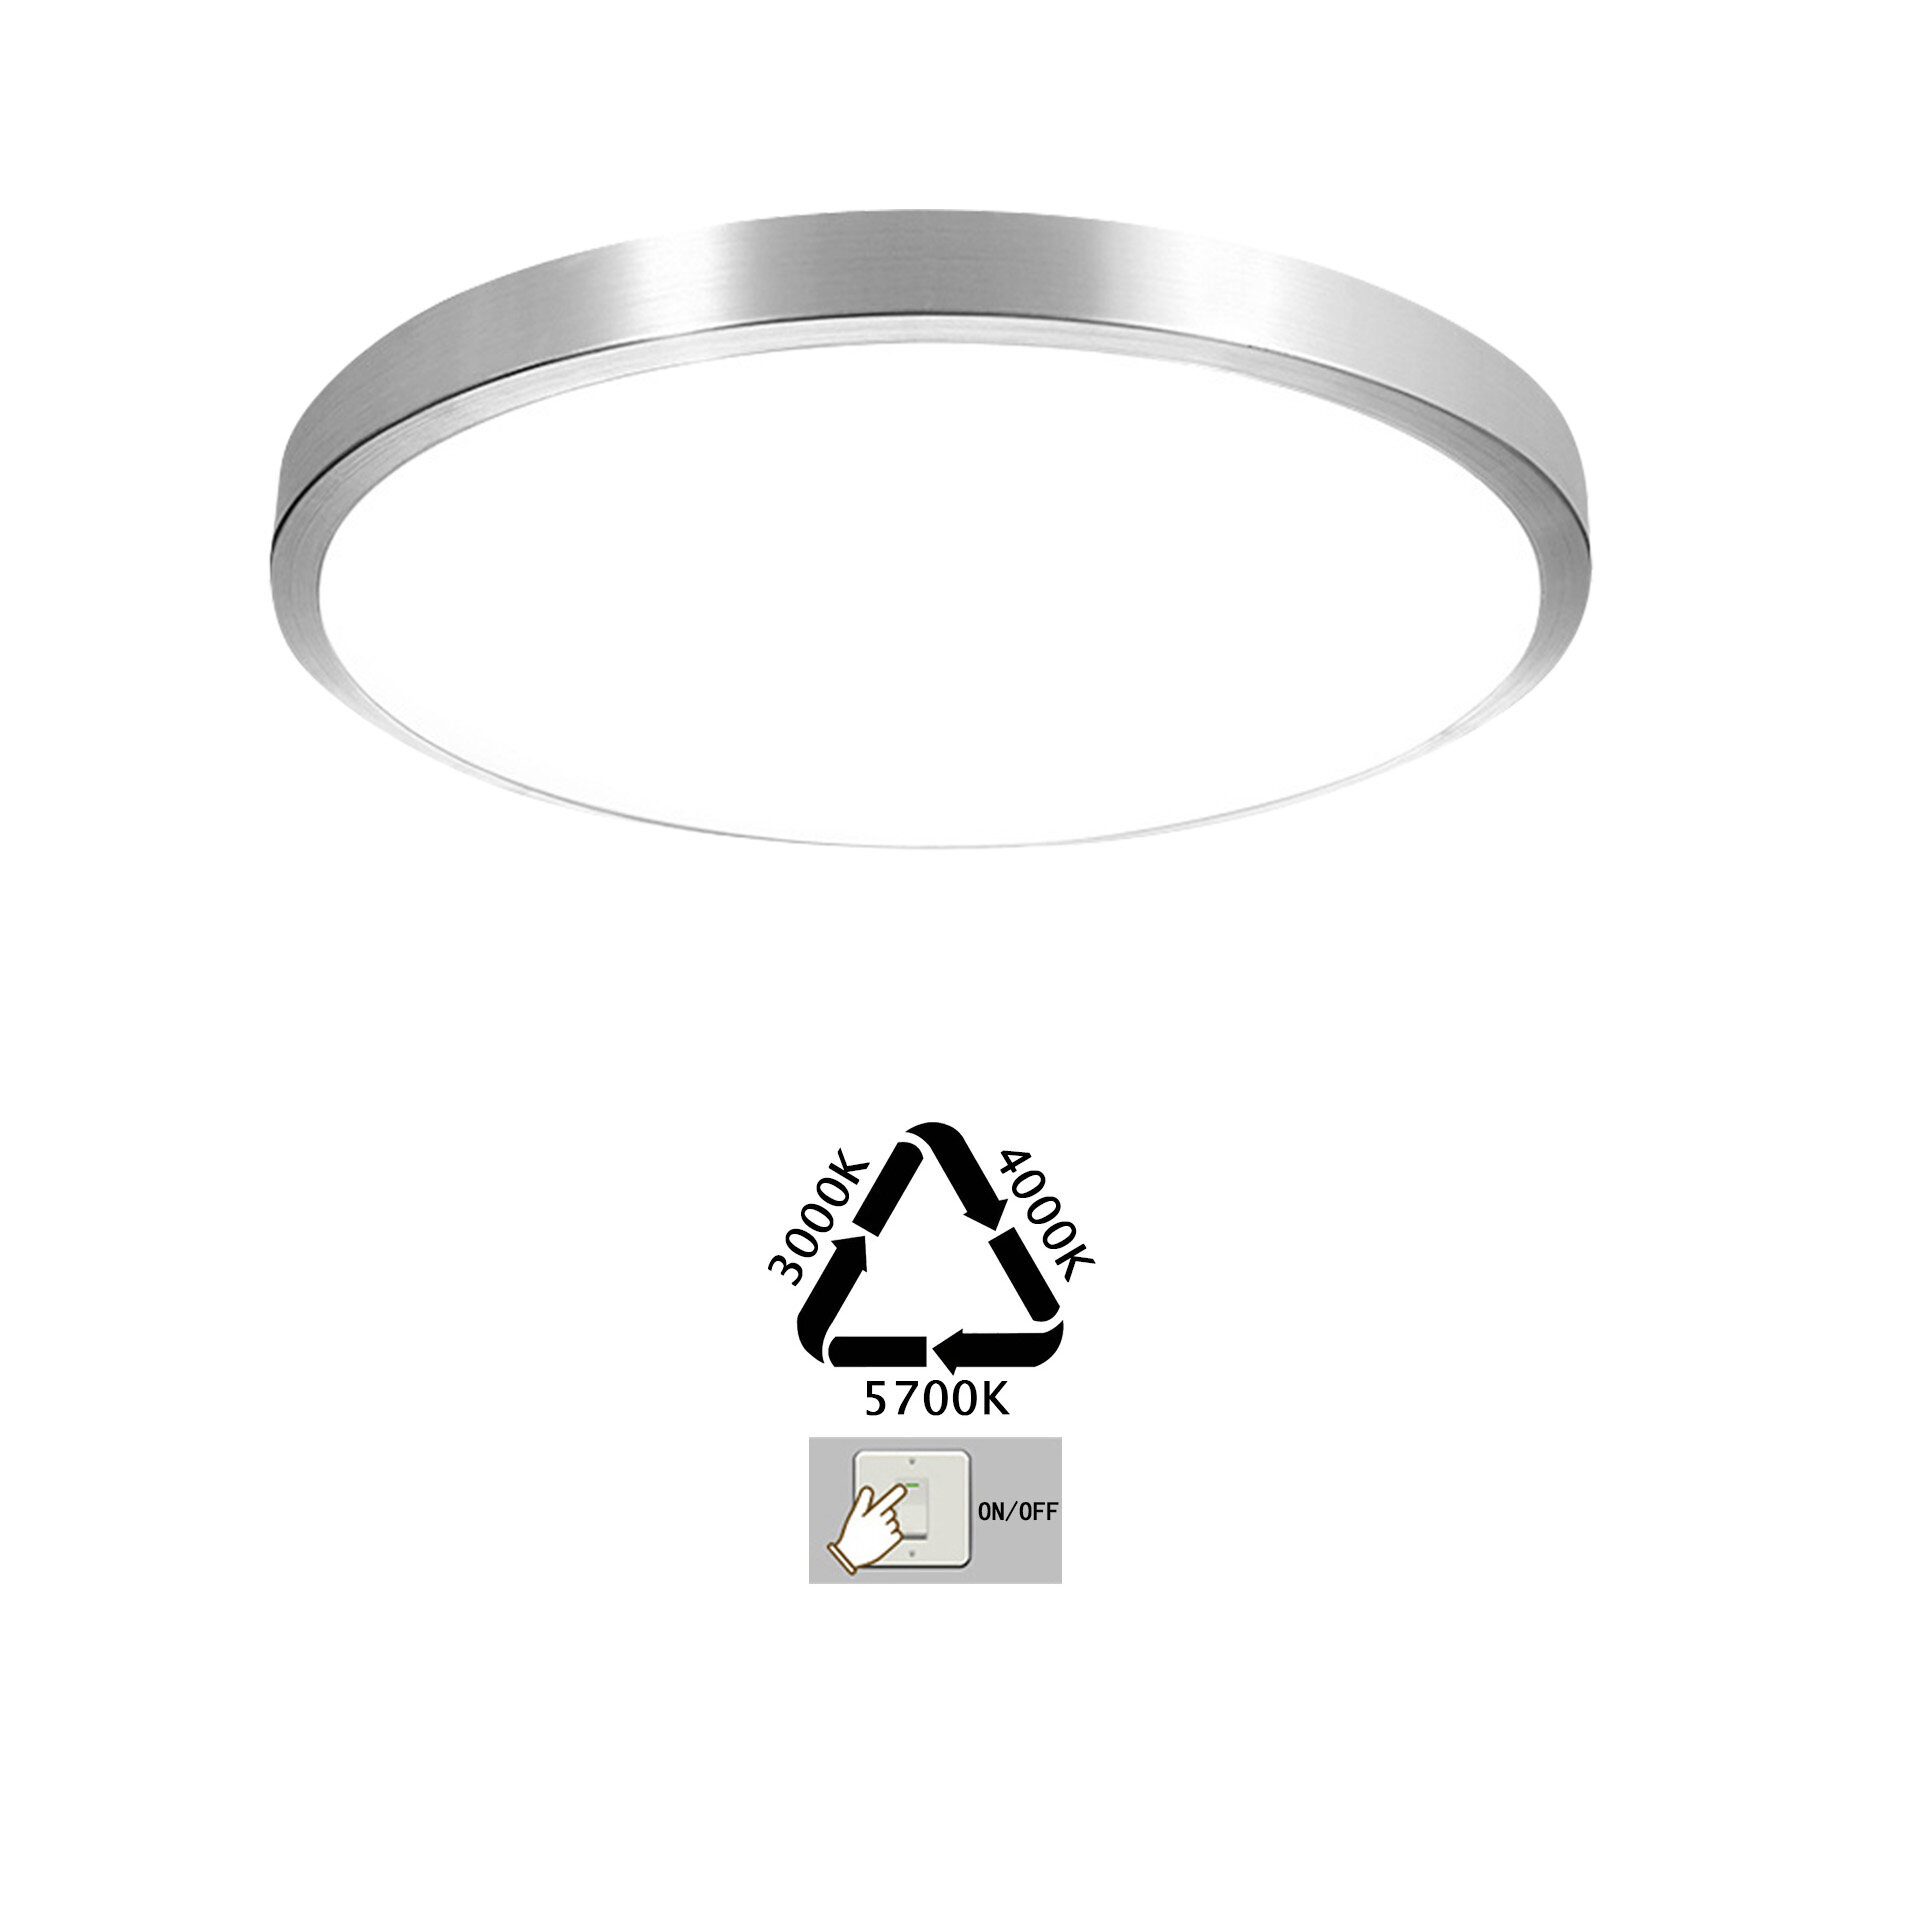 Metal Ceiling light CCT for Dimming: